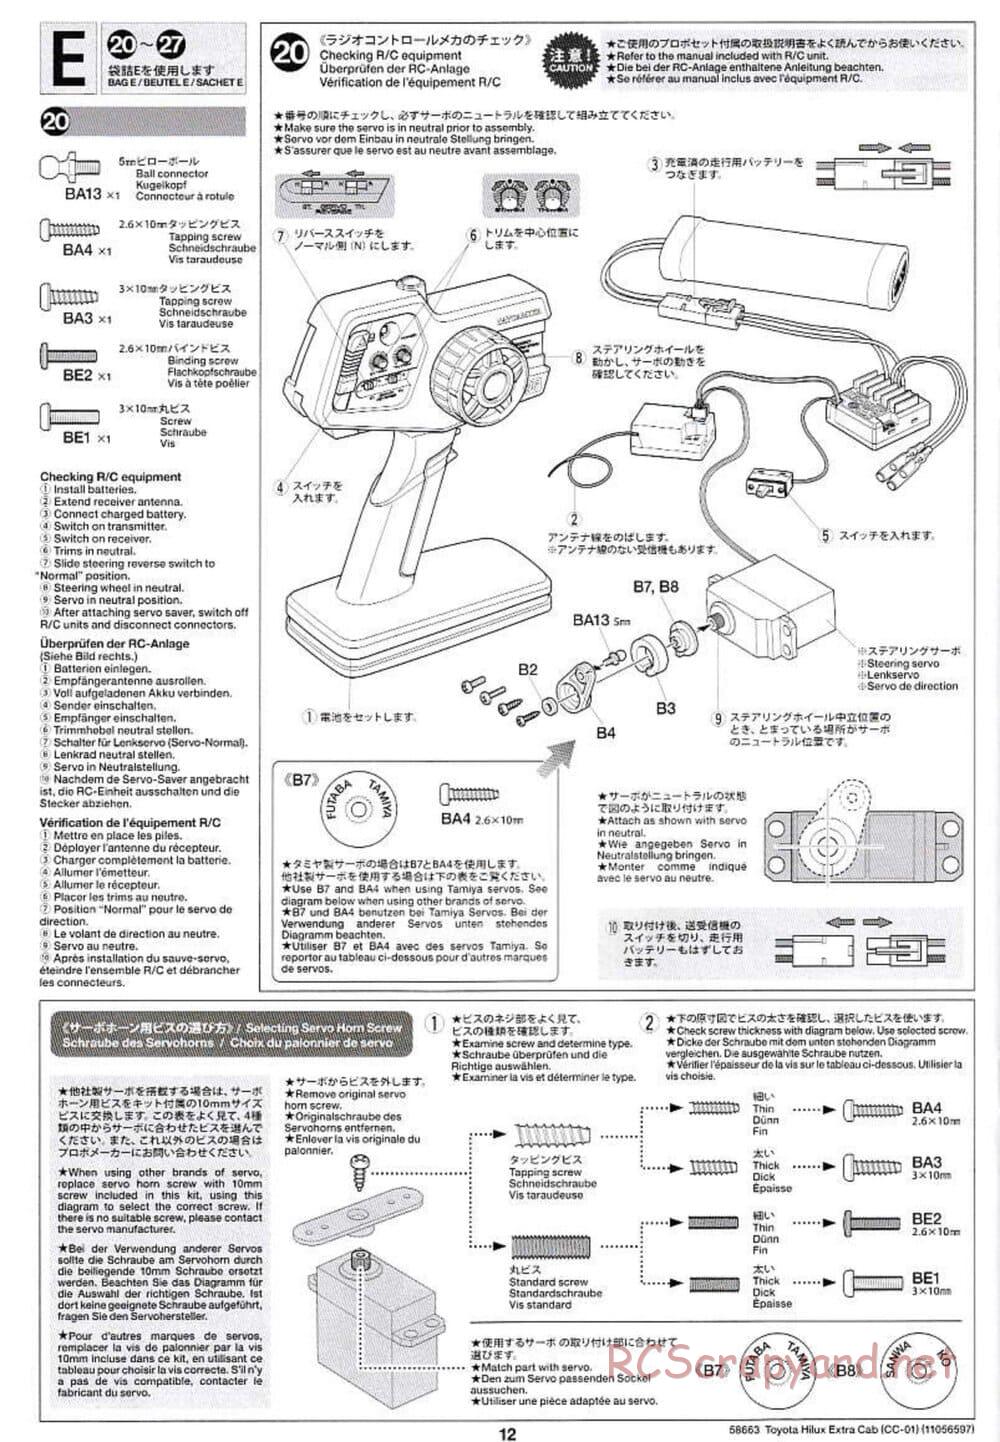 Tamiya - Toyota Hilux Extra Cab - CC-01 Chassis - Manual - Page 12